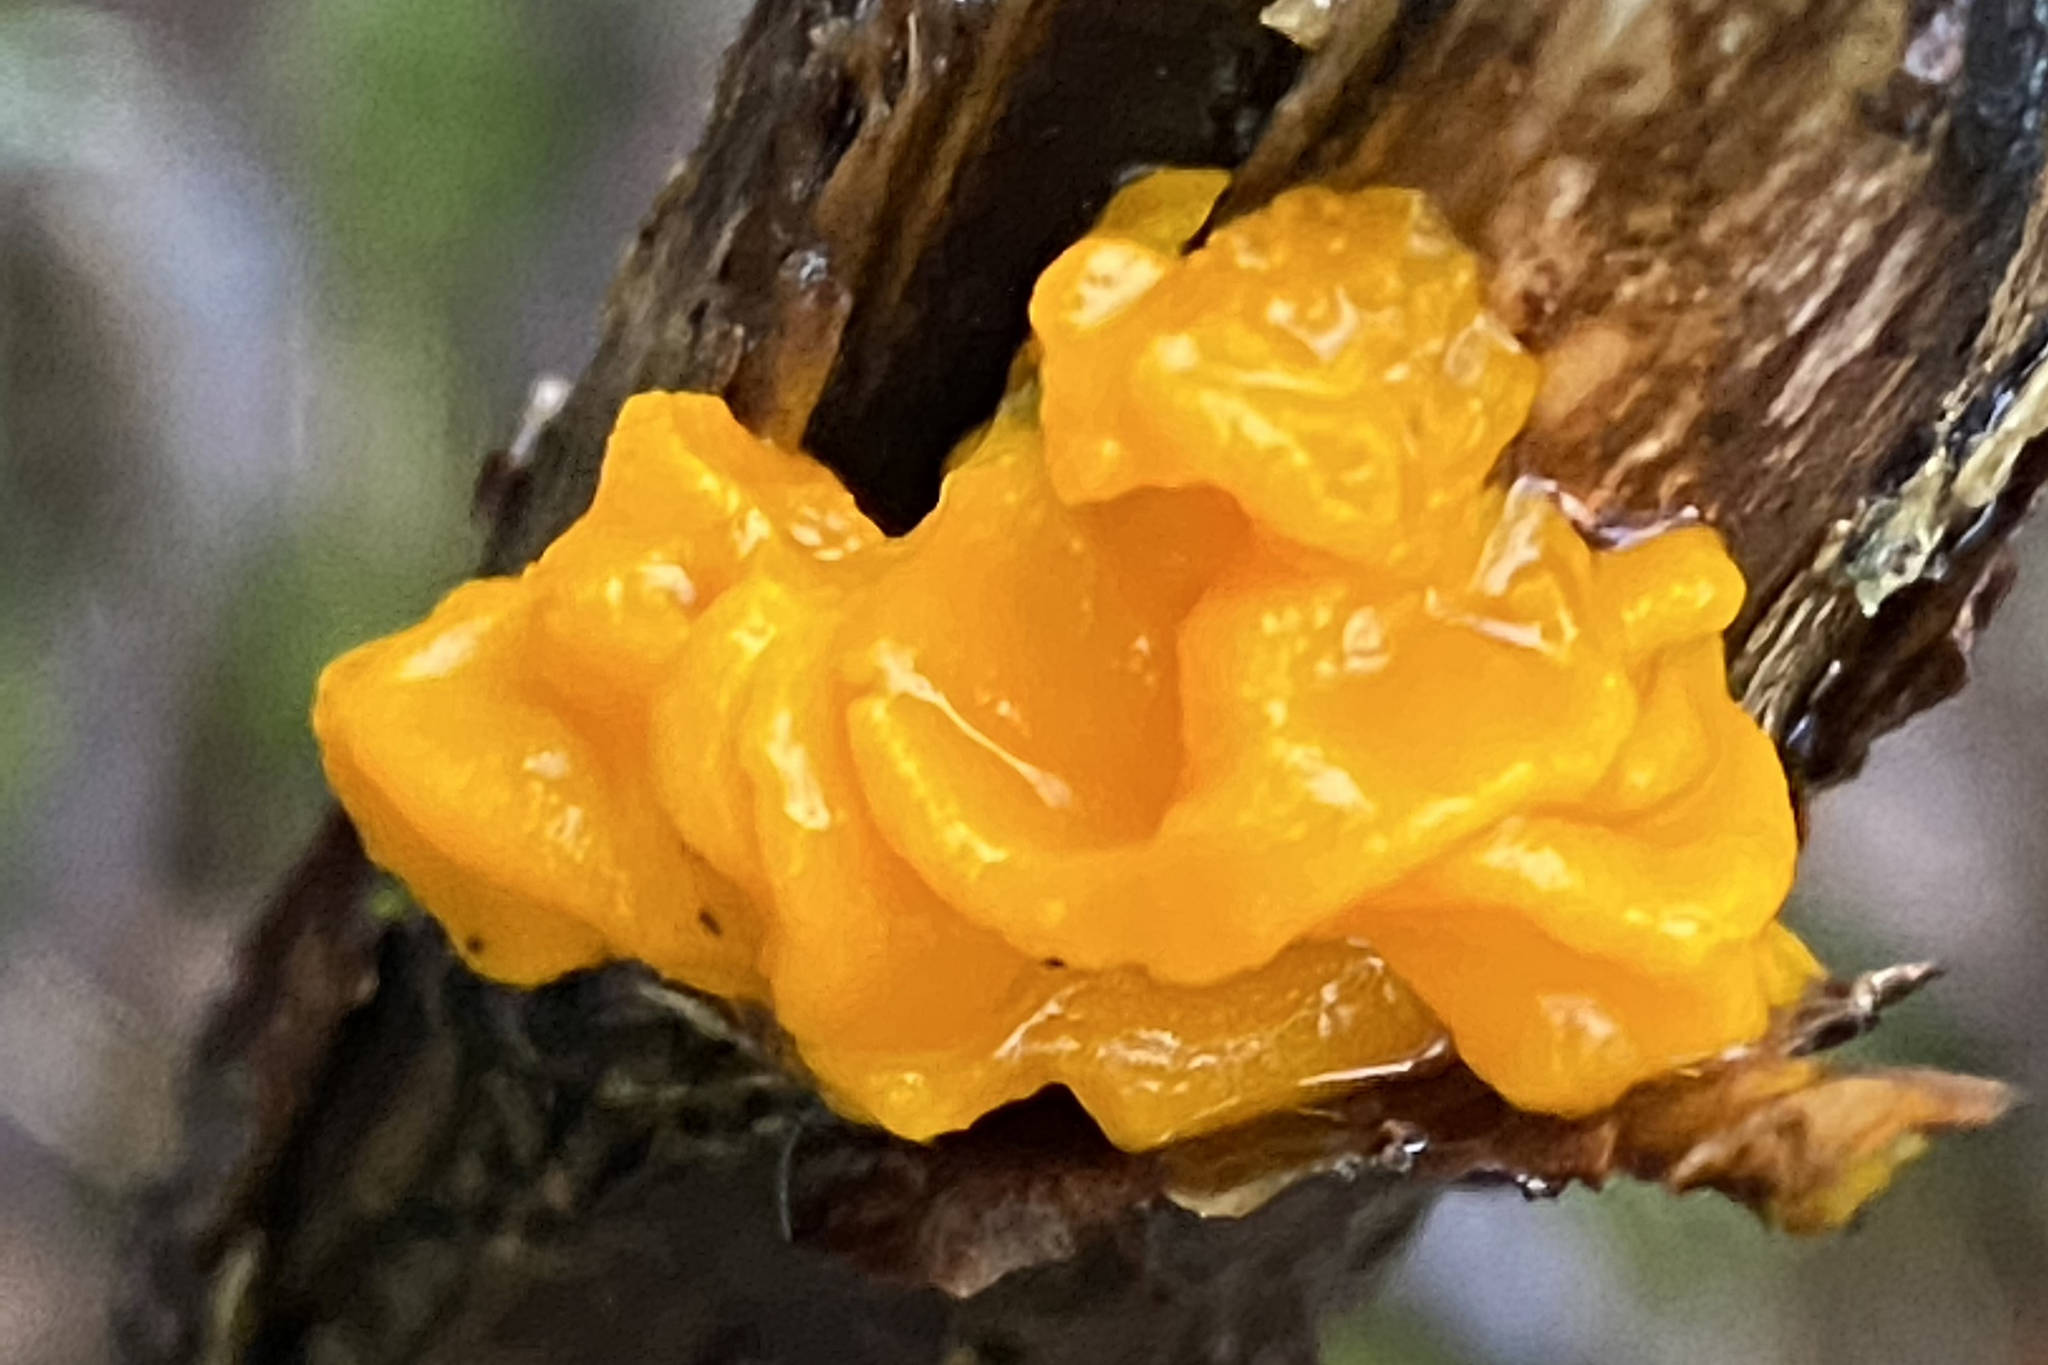 Witch’s butter, a jelly fungus, is found on decaying branches or trees and is slimy when wet as seen on the Treadwell mine ruins Trail on Jan. 16, 2021. (Courtesy Photo / Denise Carroll)